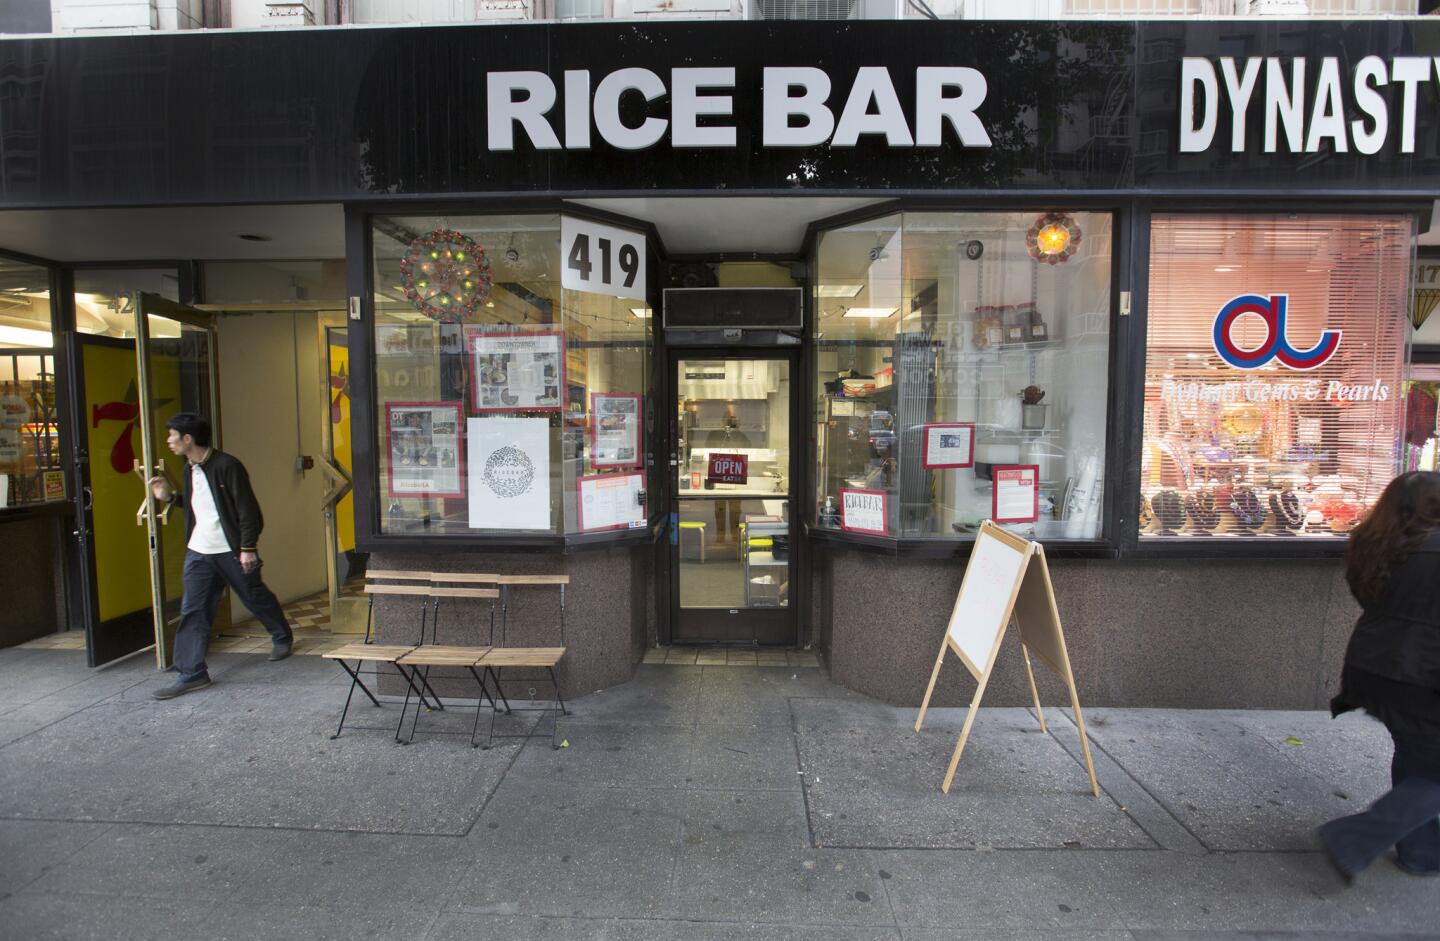 Look through the windows of Rice Bar and inside you'll see a wrap-around marble bar where customers can belly up to one of seven stools for a sit-down lunch. Customers can also pick up orders to go and get a can of soda from a cooler.